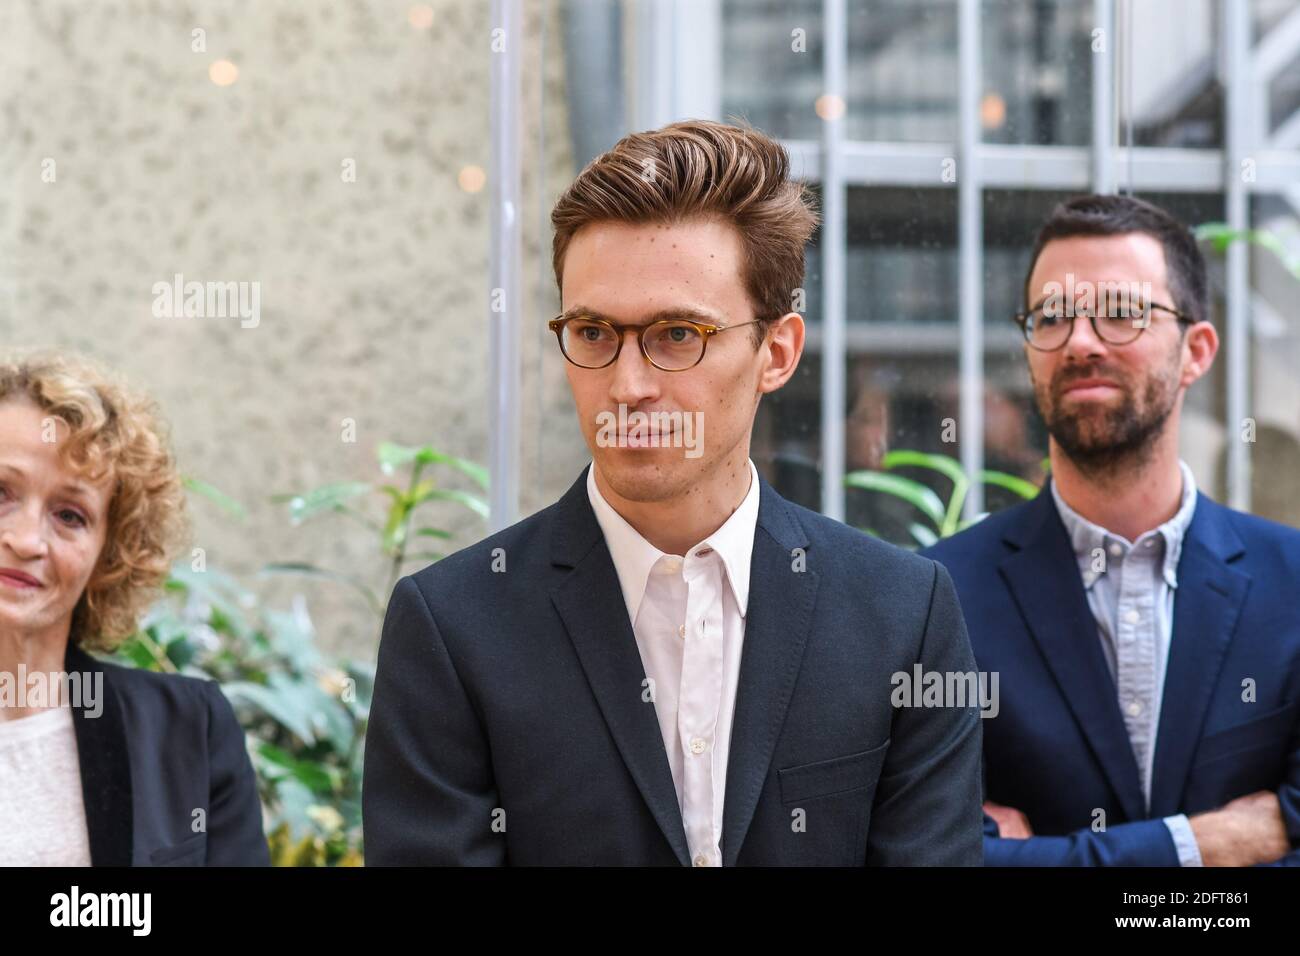 Jean-Baptiste Malet seen during ceremony for Prix Albert Londres award in  Istanbul, Turkey, on October 22, 2018. Photo by Ammar Abd  Rabbo/ABACAPRESS.COM Stock Photo - Alamy